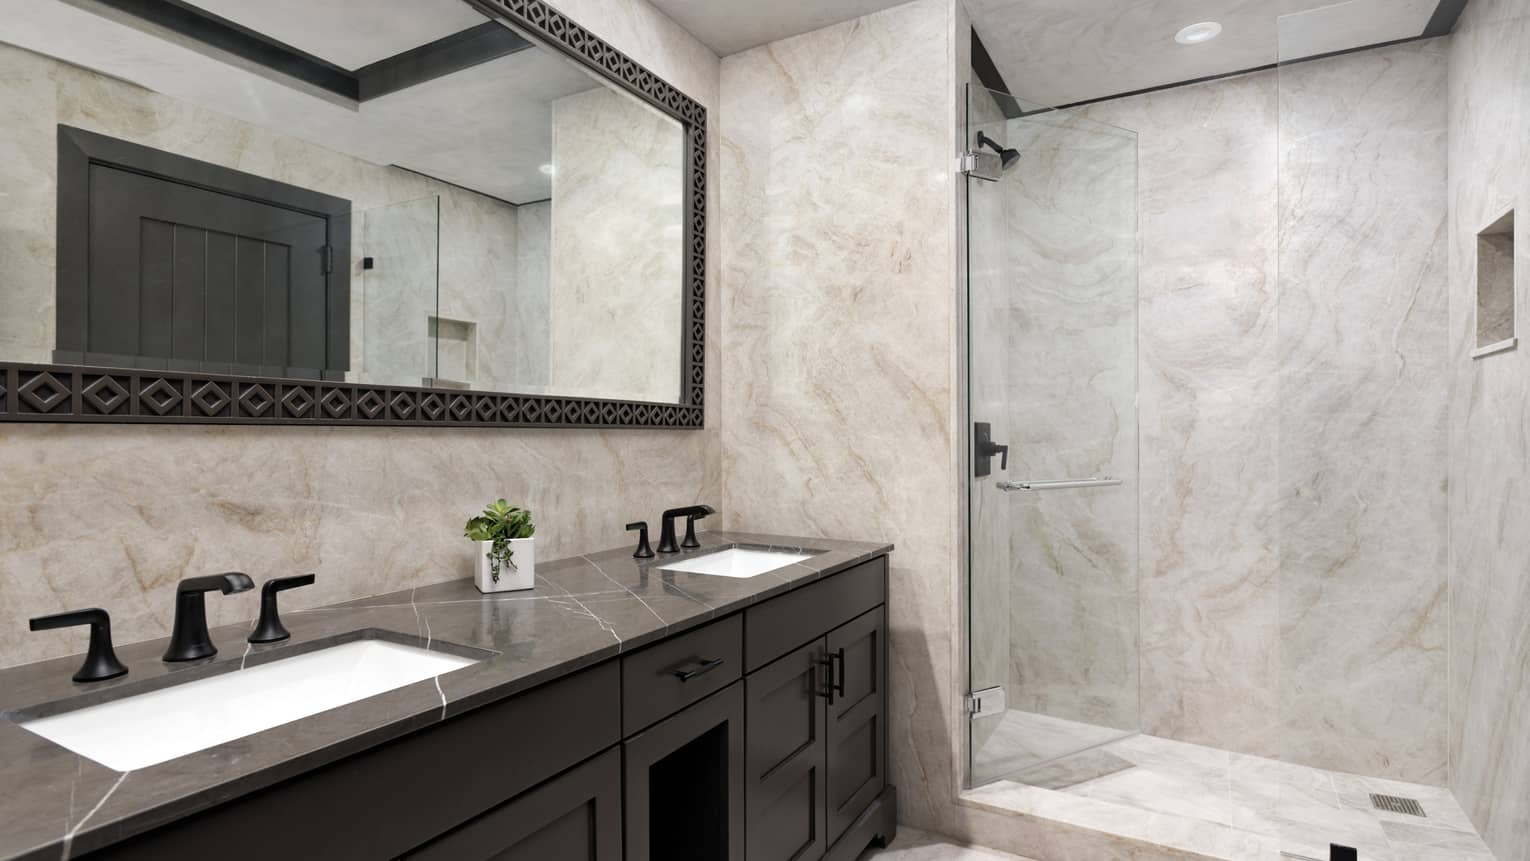 Bathroom with granite walls, glass walk-in shower, double vanity with dark cabinets